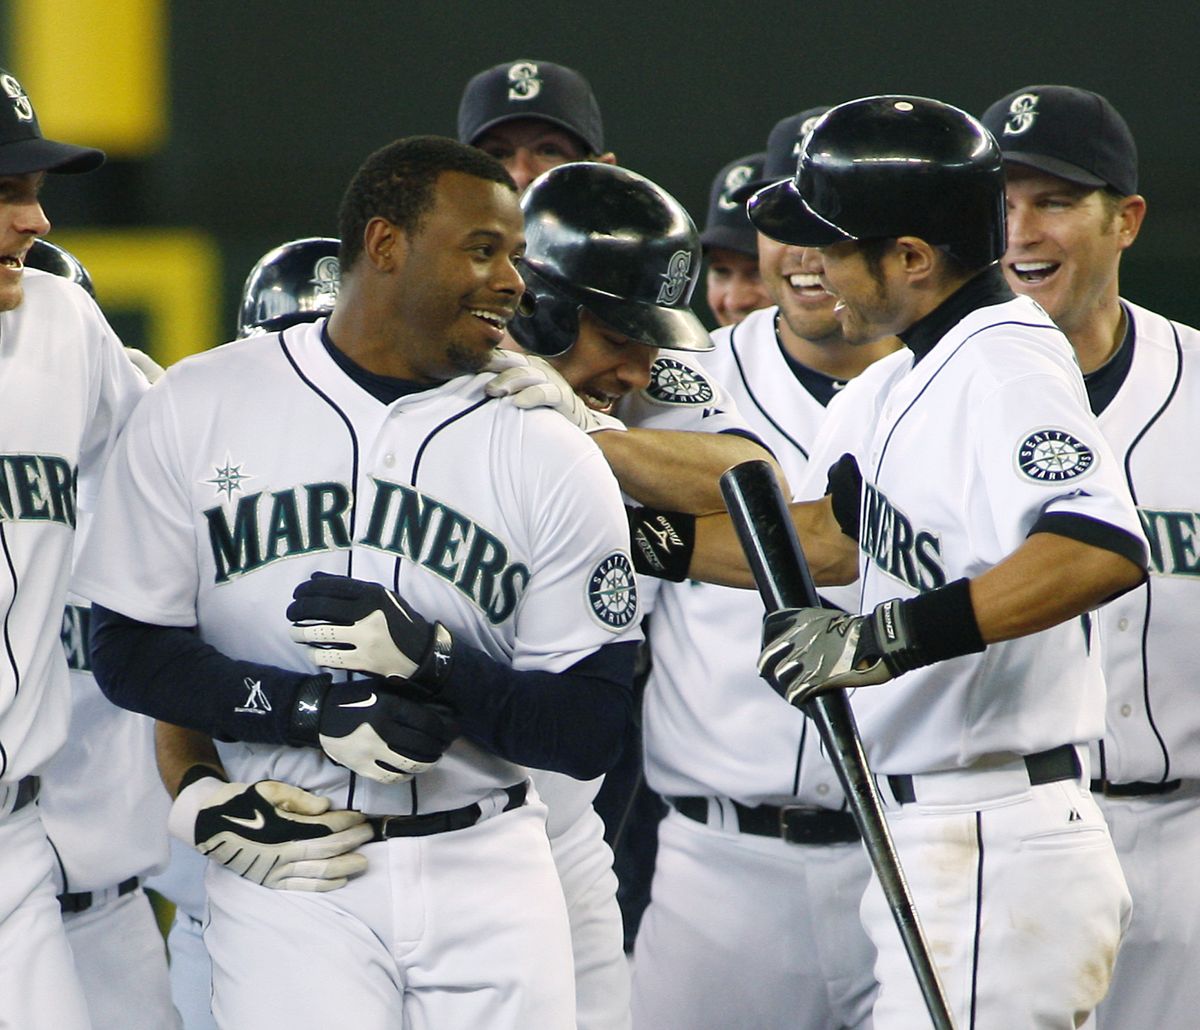 Ichiro Suzuki, right, leads the welcoming committee for the Seattle Mariners to celebrate Ken Griffey Jr.’s winning hit Thursday, May 20, 2010, against Toronto.  (Associated Press / Associated Press)